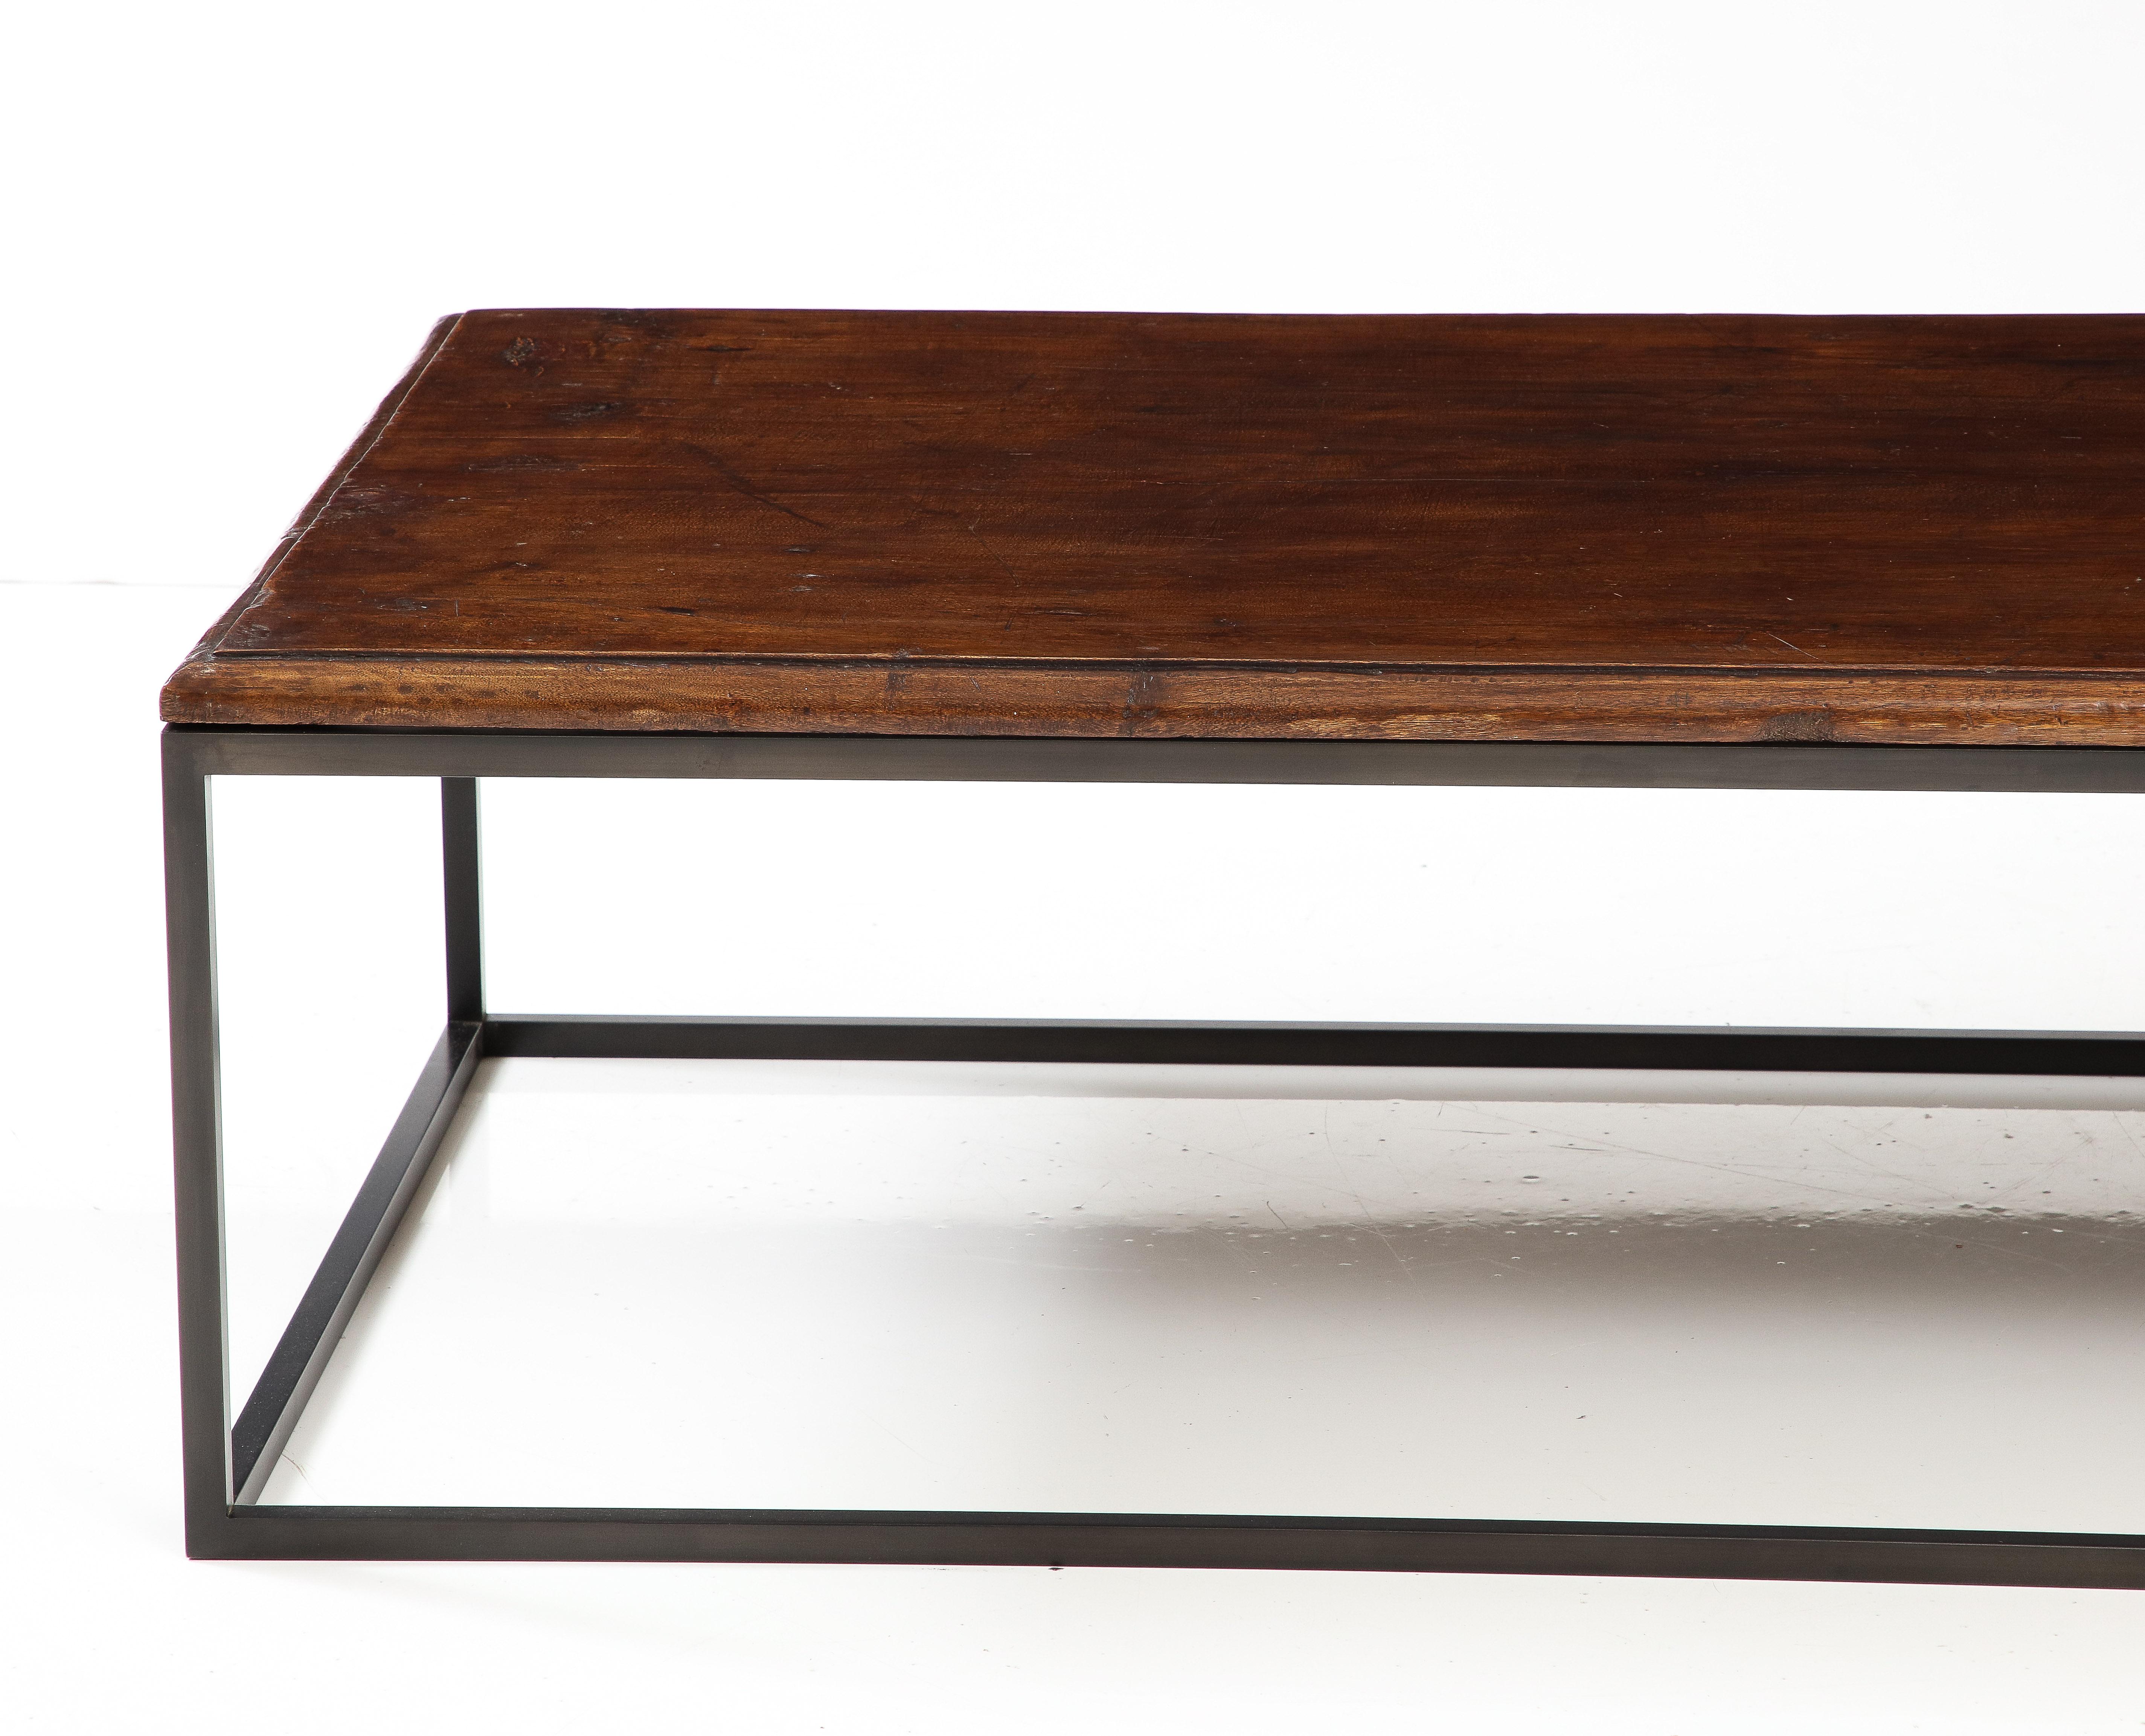 Minimalist 18th C. Italian Dark Walnut Coffee Table in One Thick Piece with Edge Detail For Sale